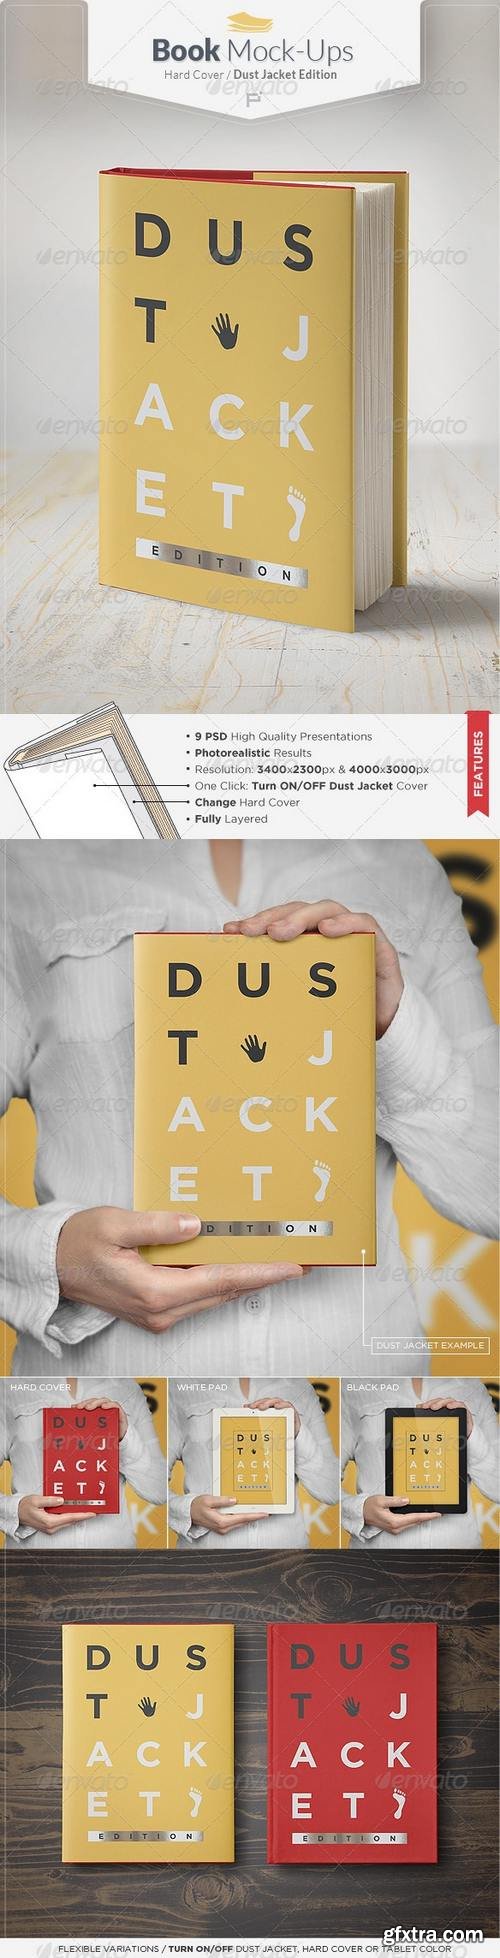 Book Mock-Up - Dust Jacket Edition - GraphicRiver 7735188